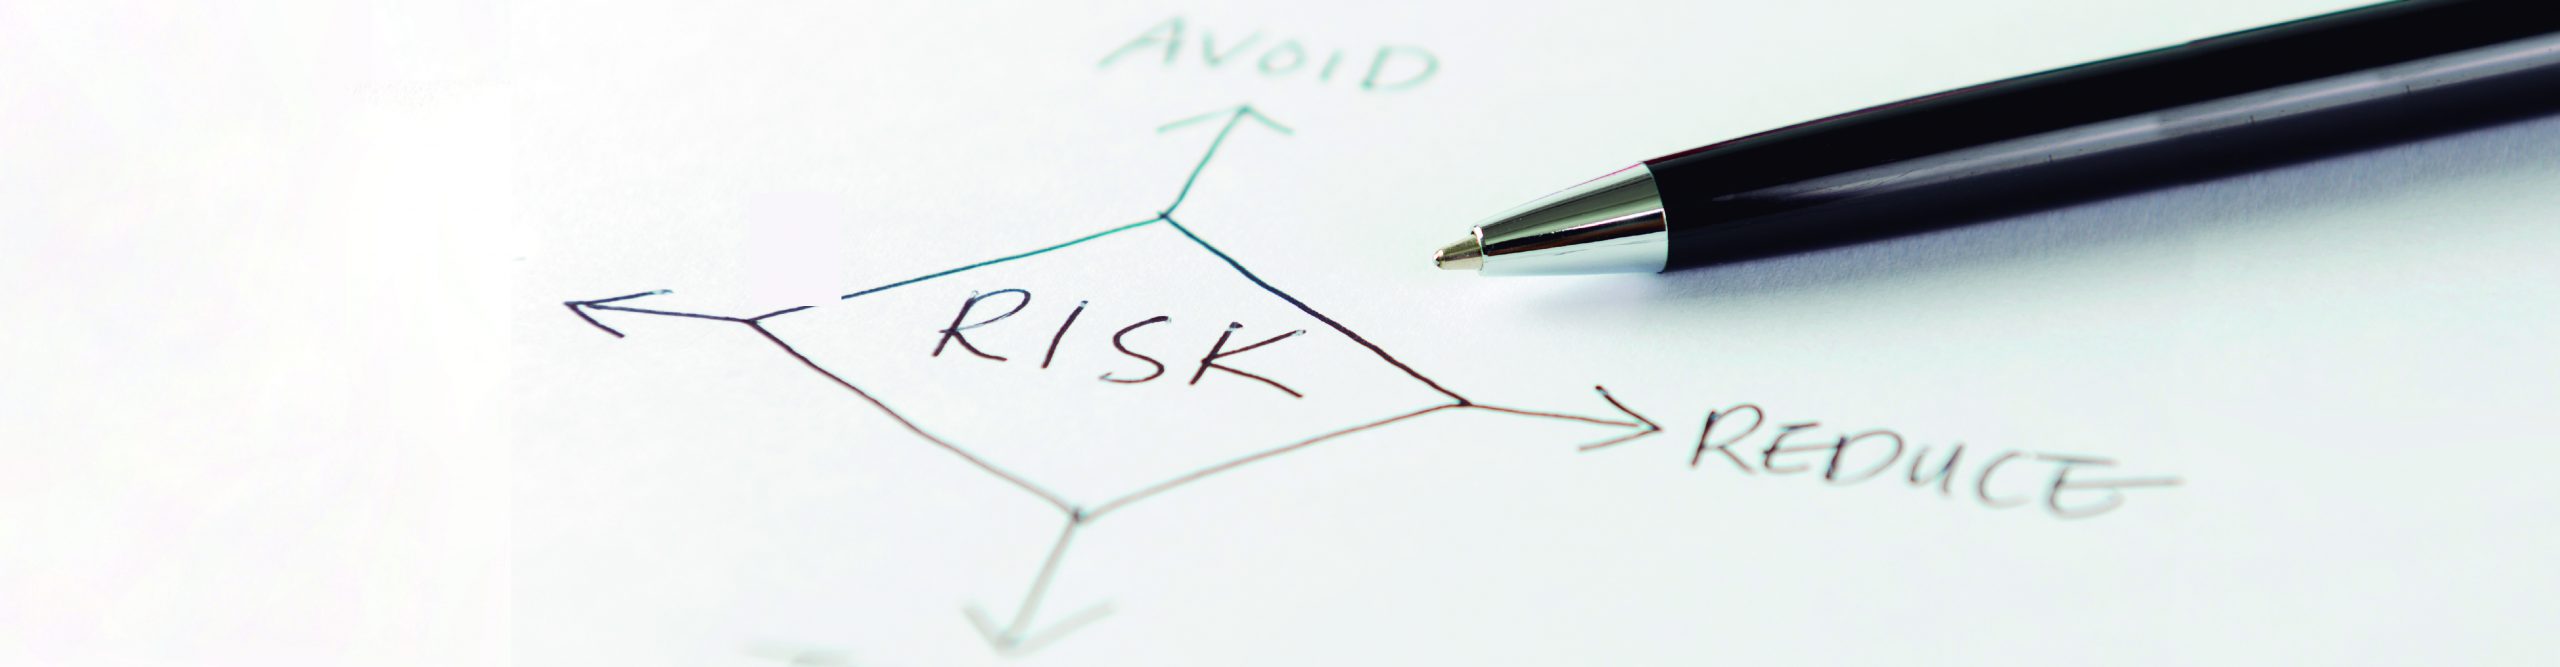 The importance of risk analysis.